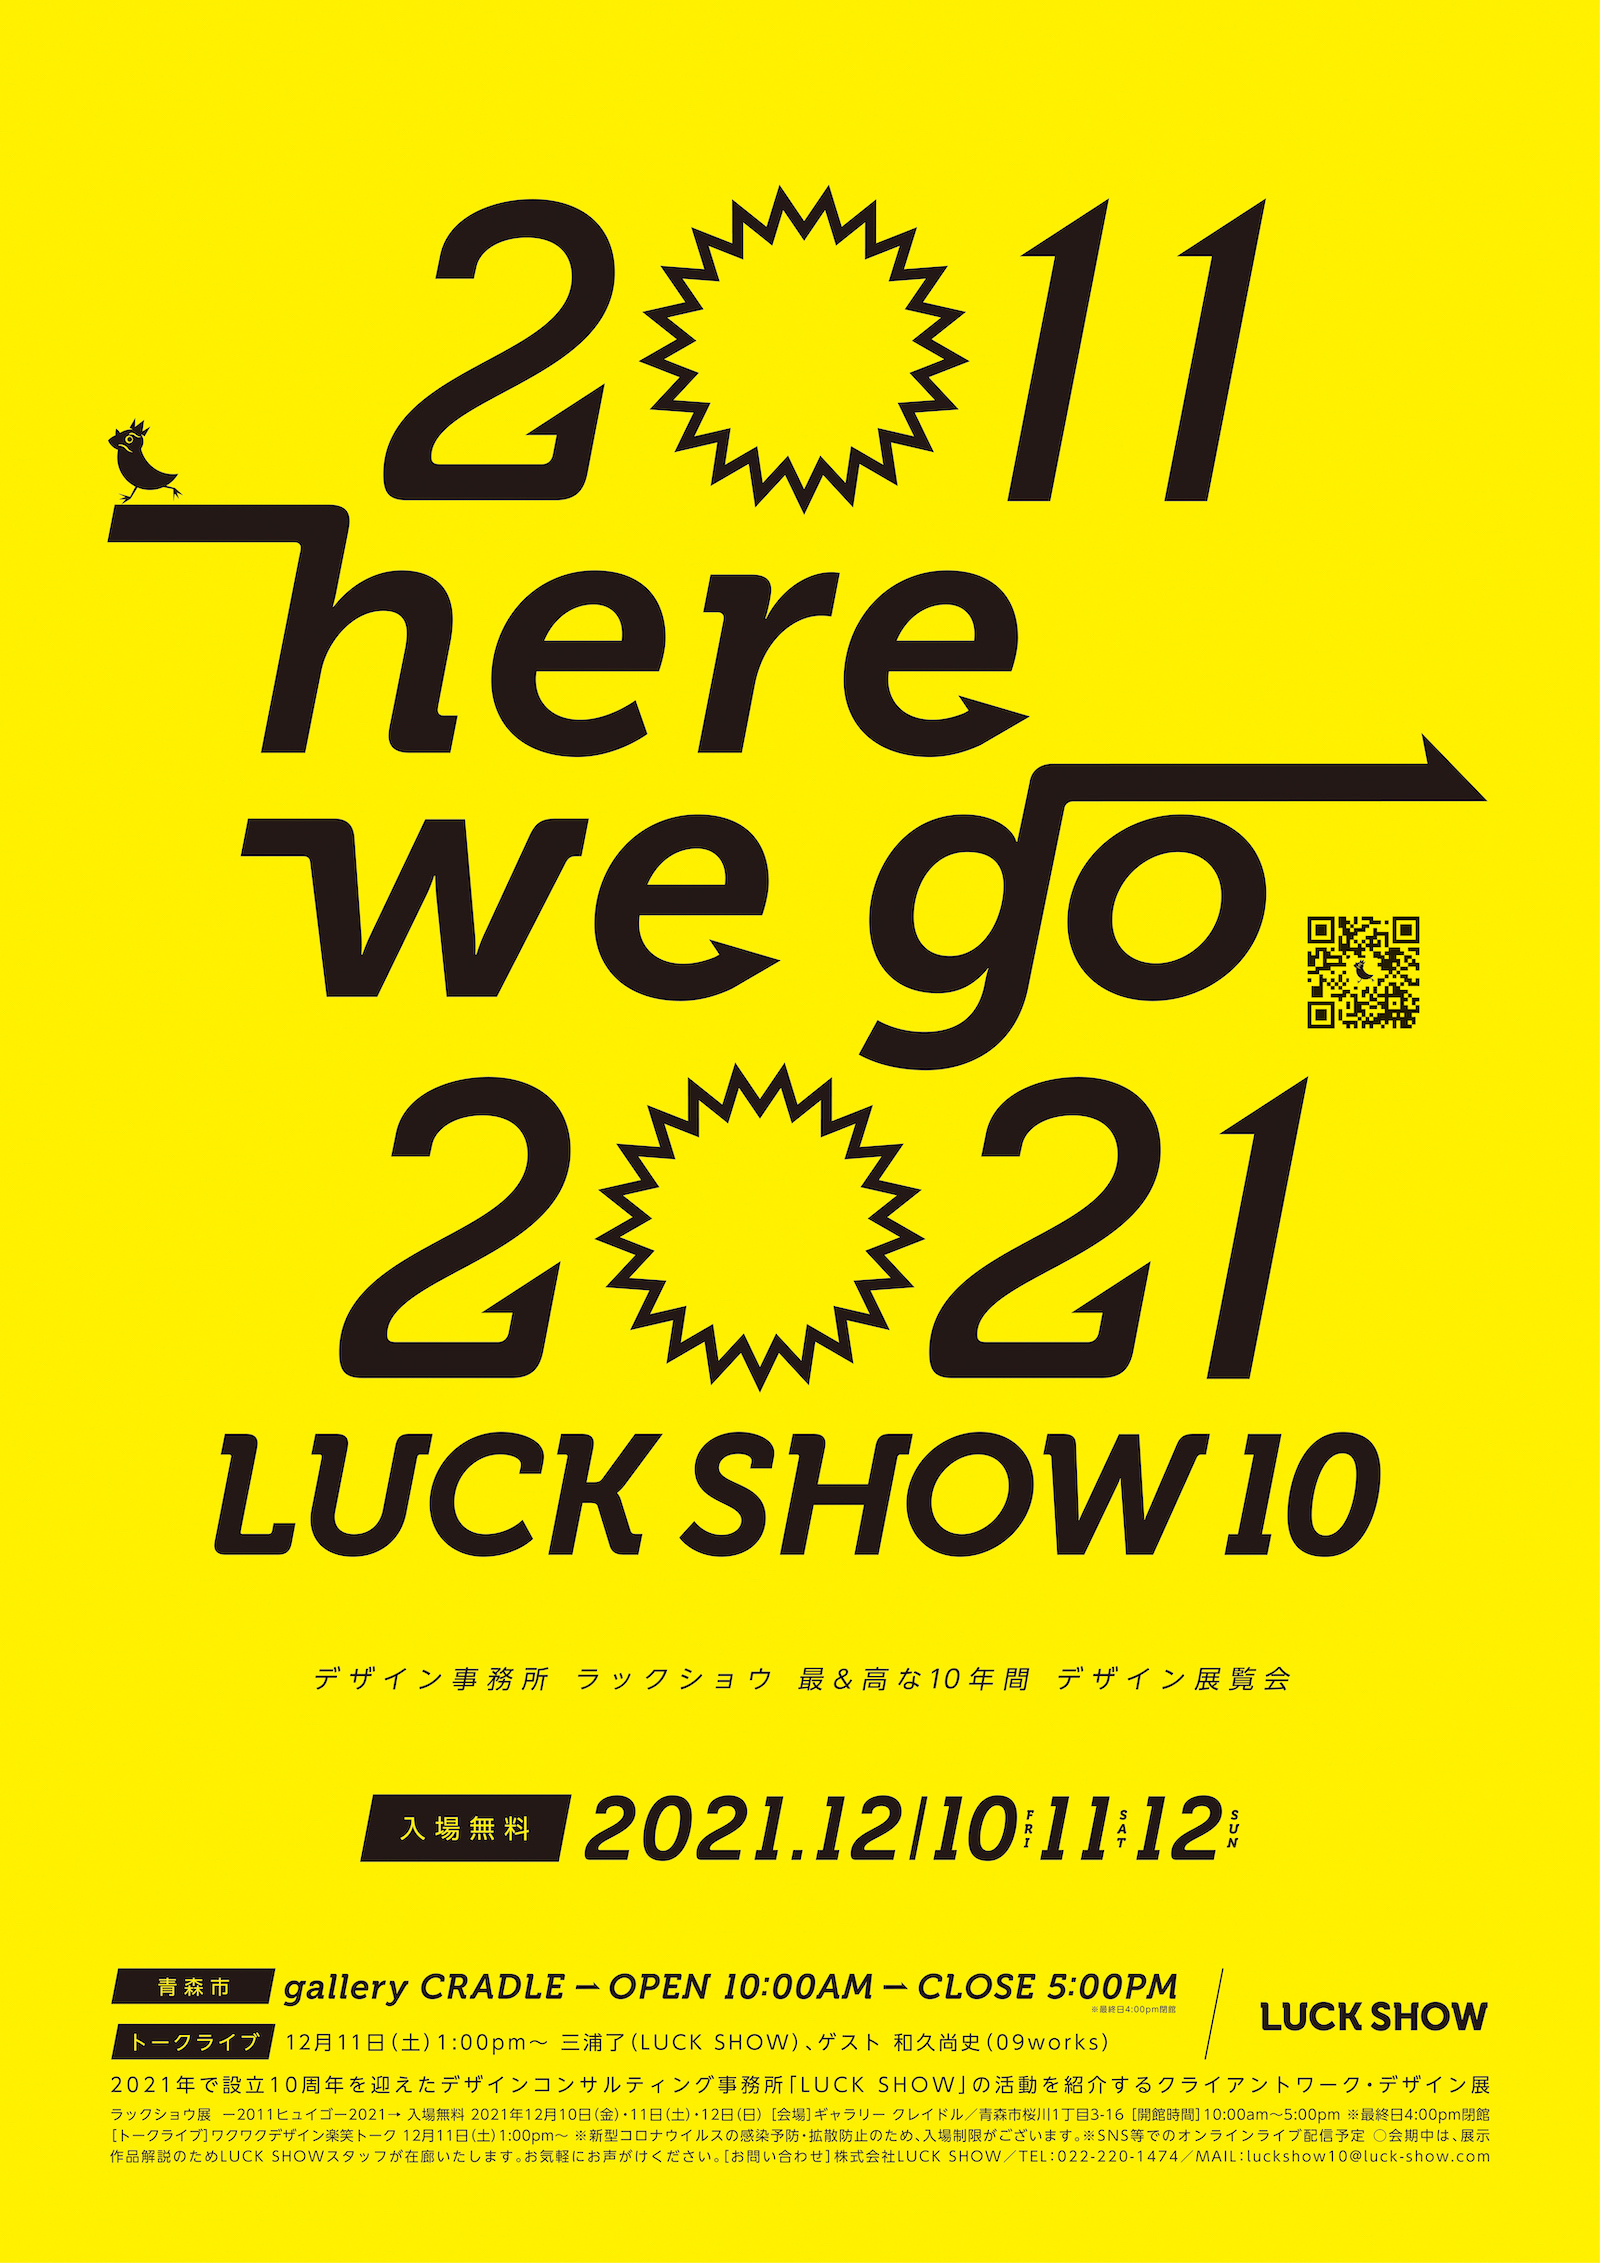 LUCK SHOW 10 -2011 here we go 2021→（三浦 了）